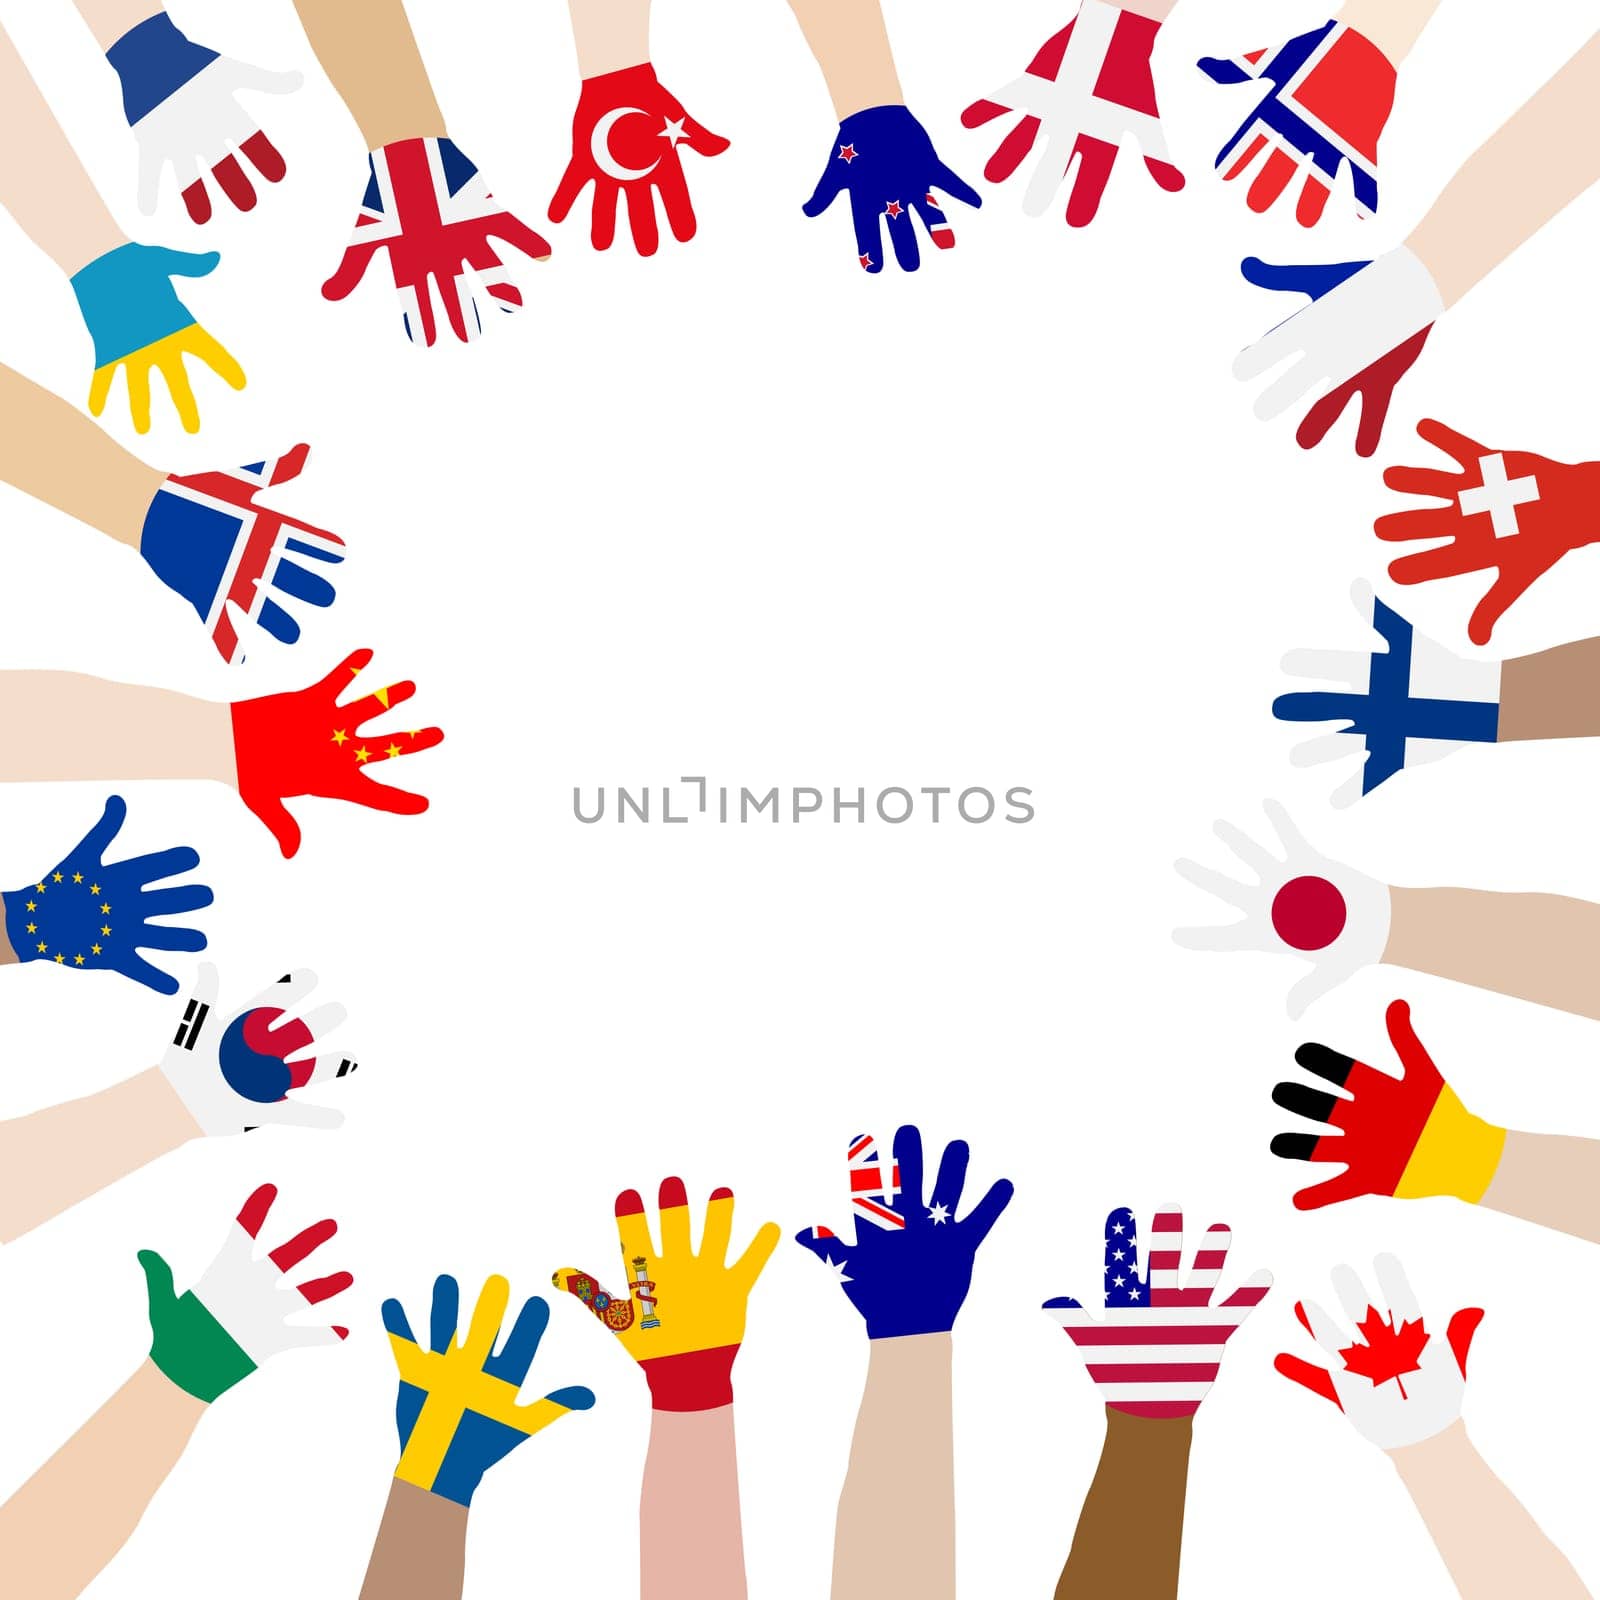 Peace concept with raised hands painted in the colors of the world flags by hibrida13